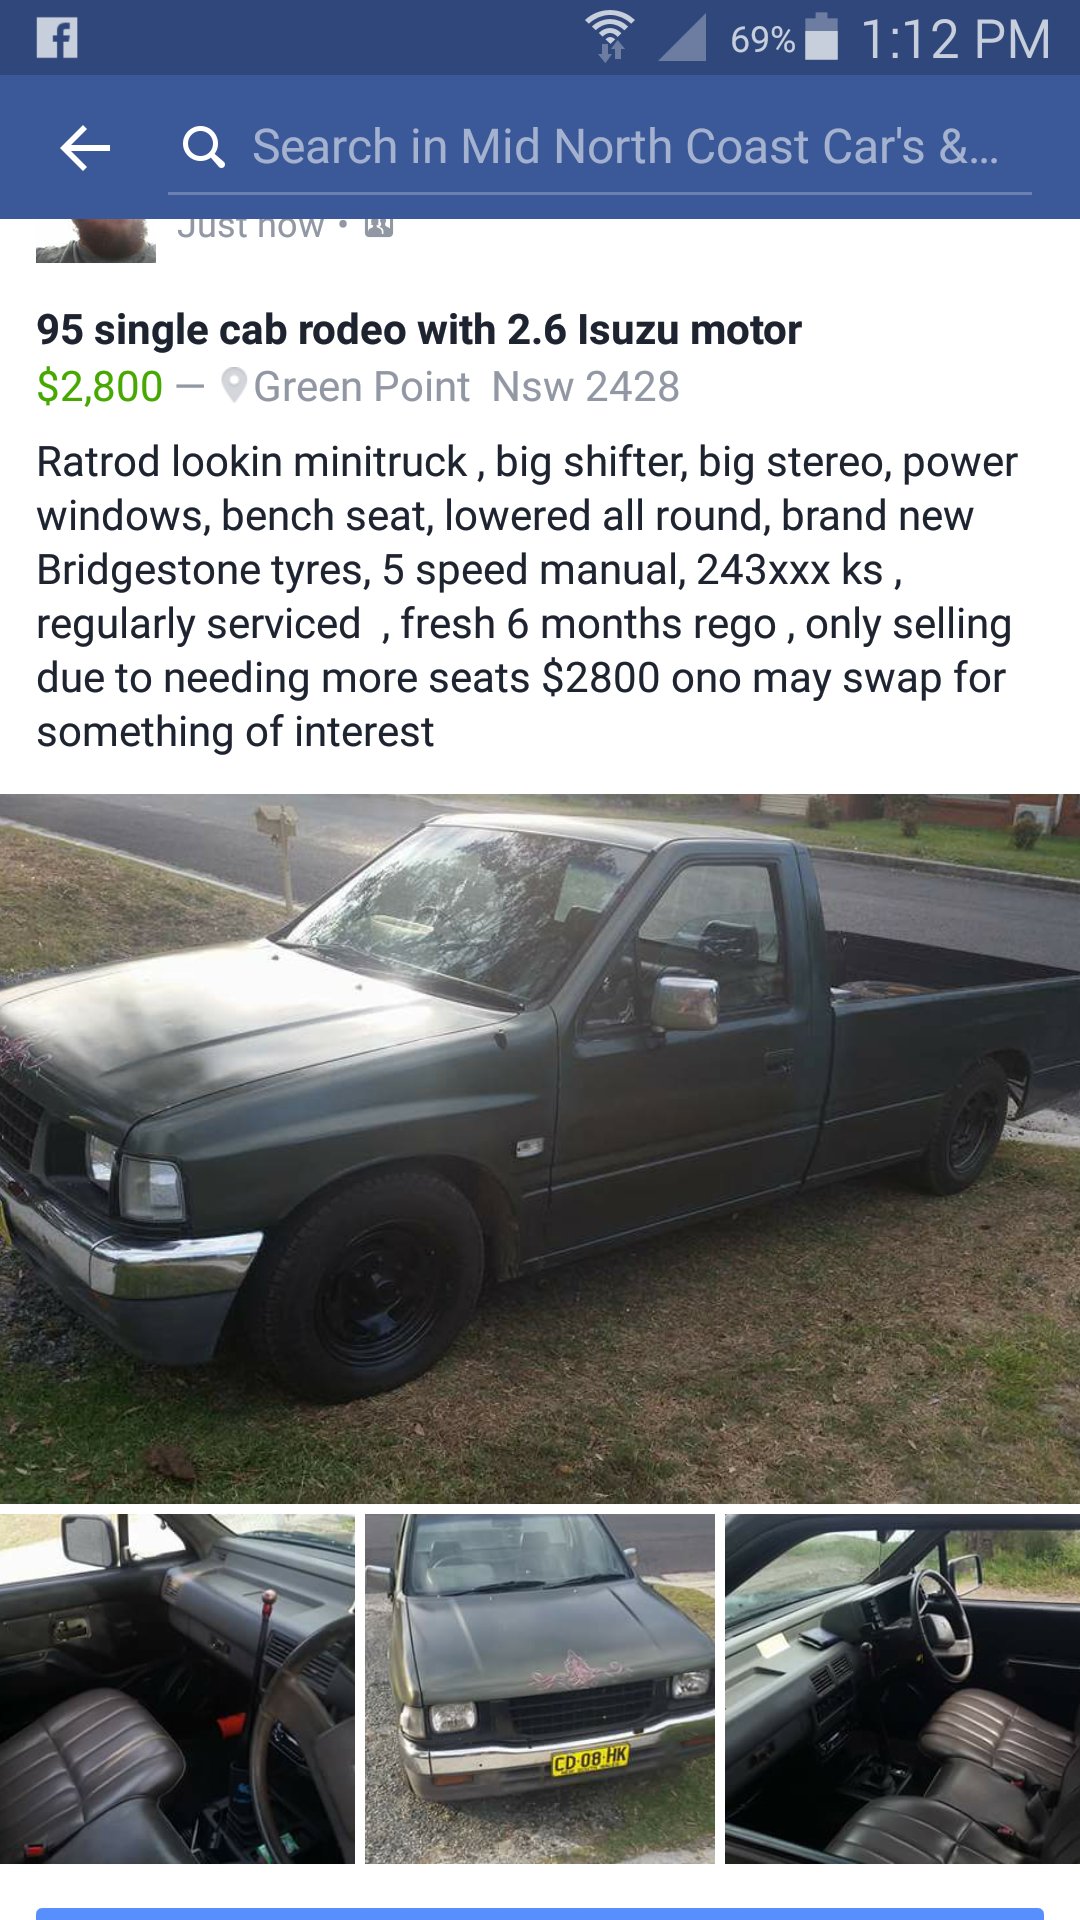 1995 holden rodeo for sale or swap nsw: mid north coast